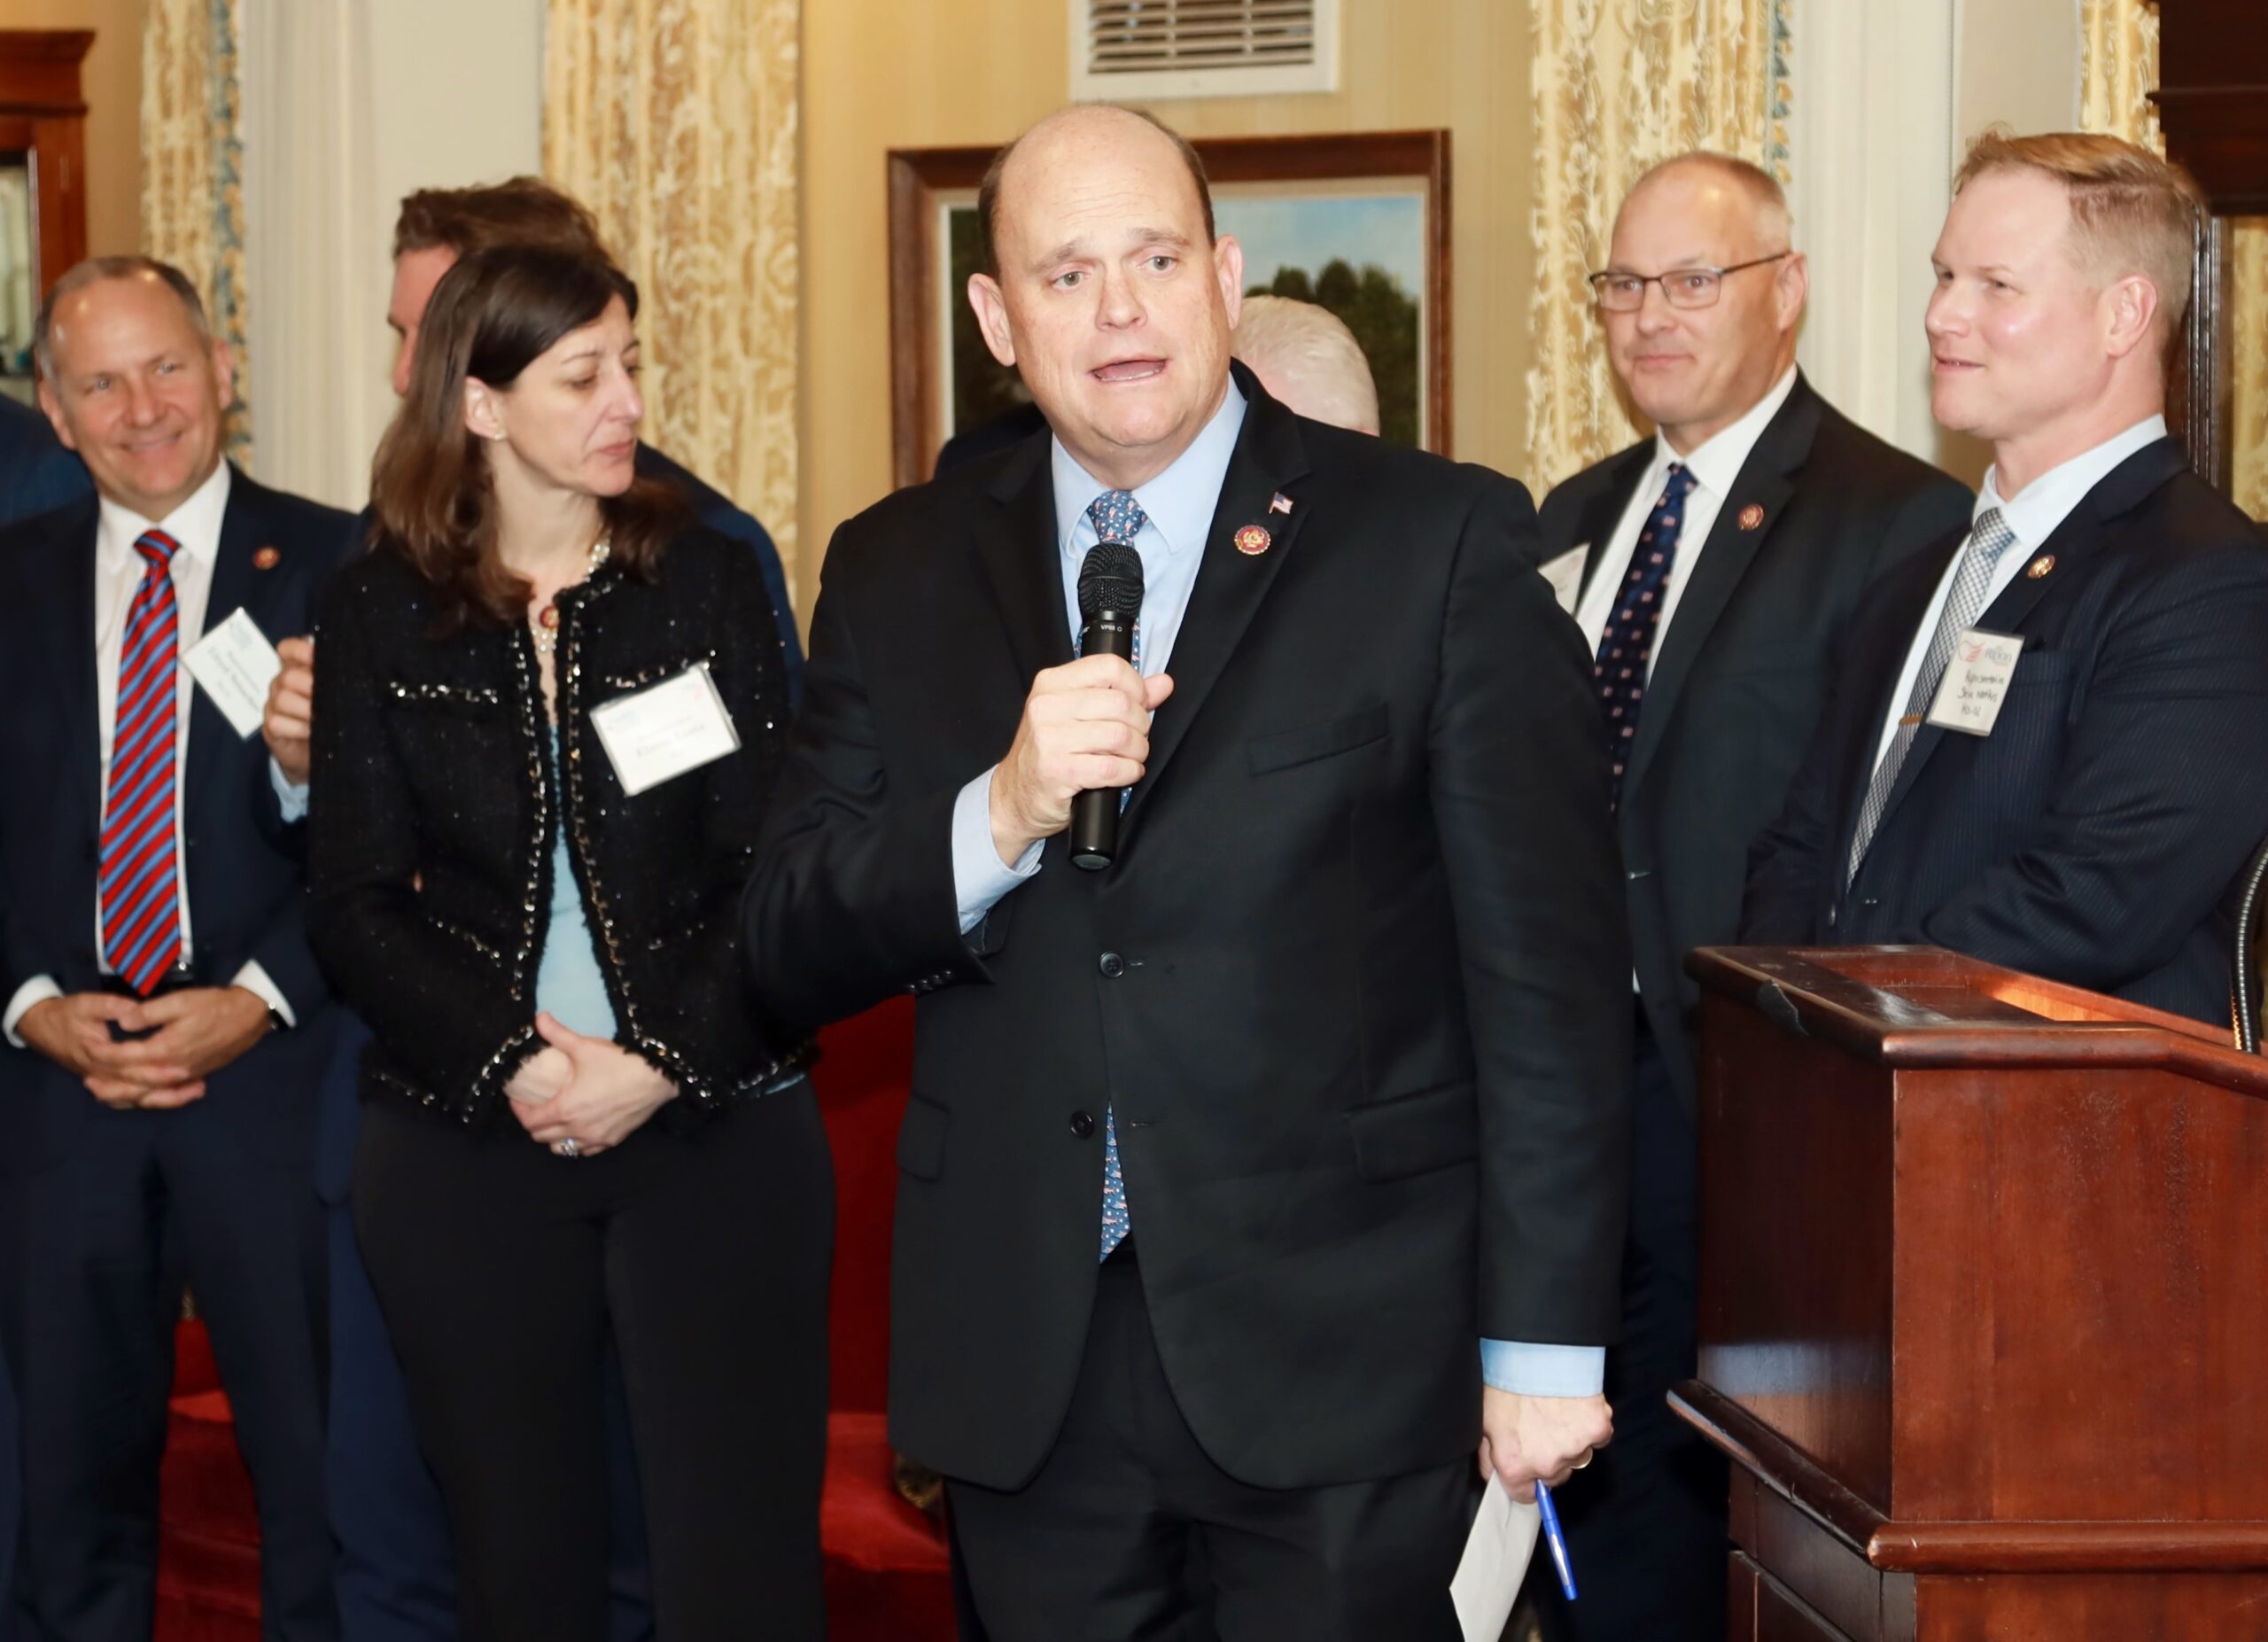 Ripon Society & Franklin Center Hold Reception with Problem Solvers Caucus